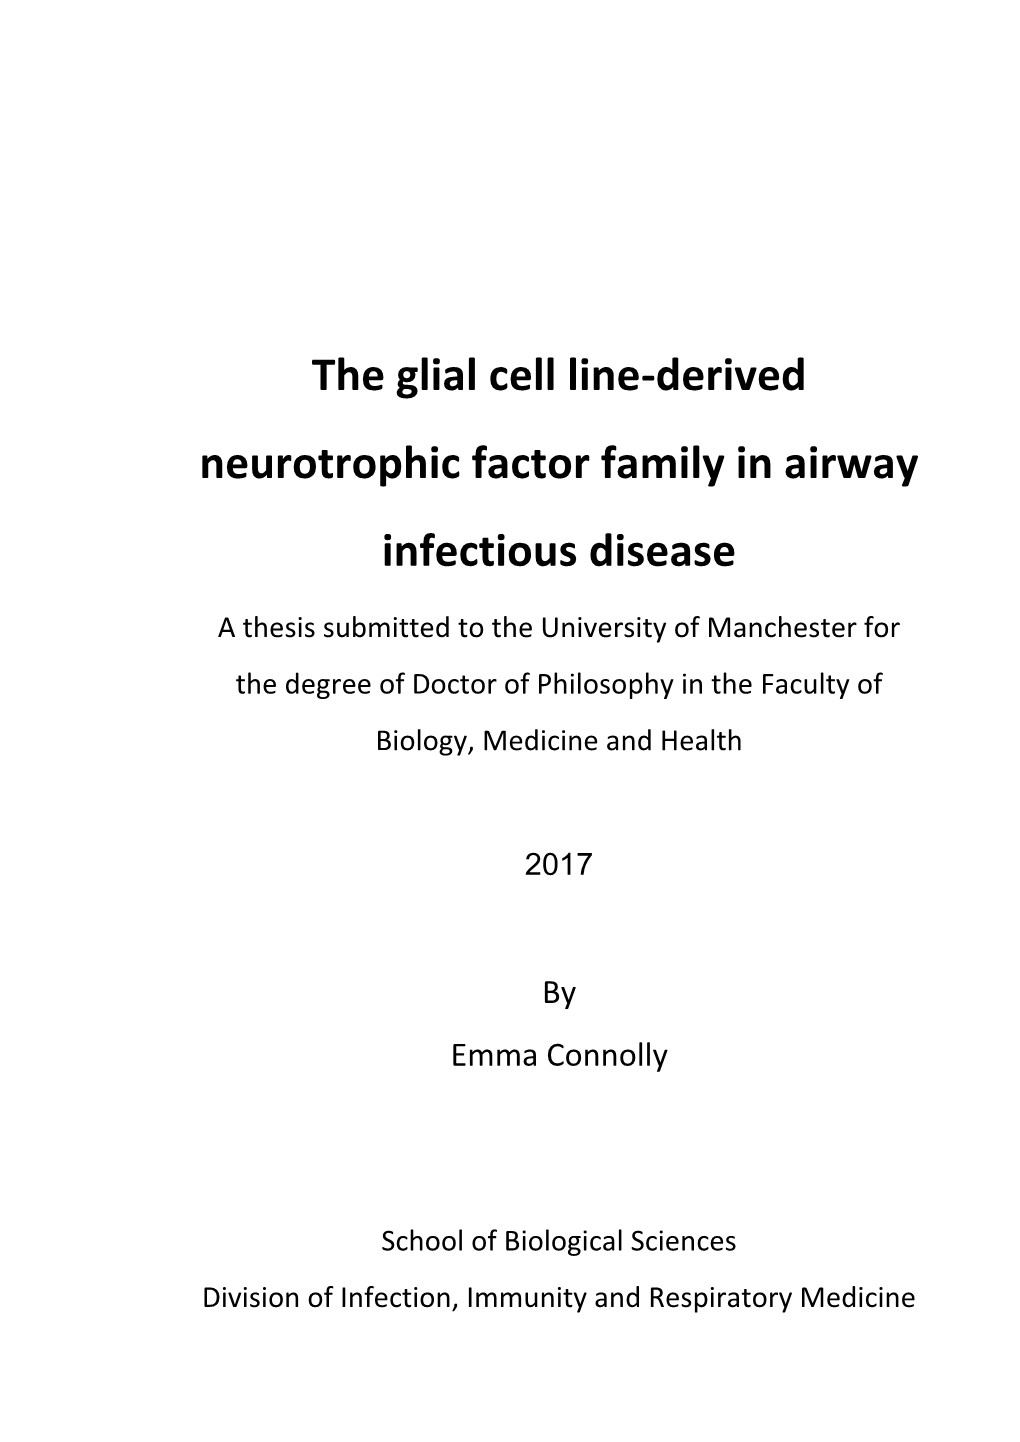 The Glial Cell Line-Derived Neurotrophic Factor Family in Airway Infectious Disease